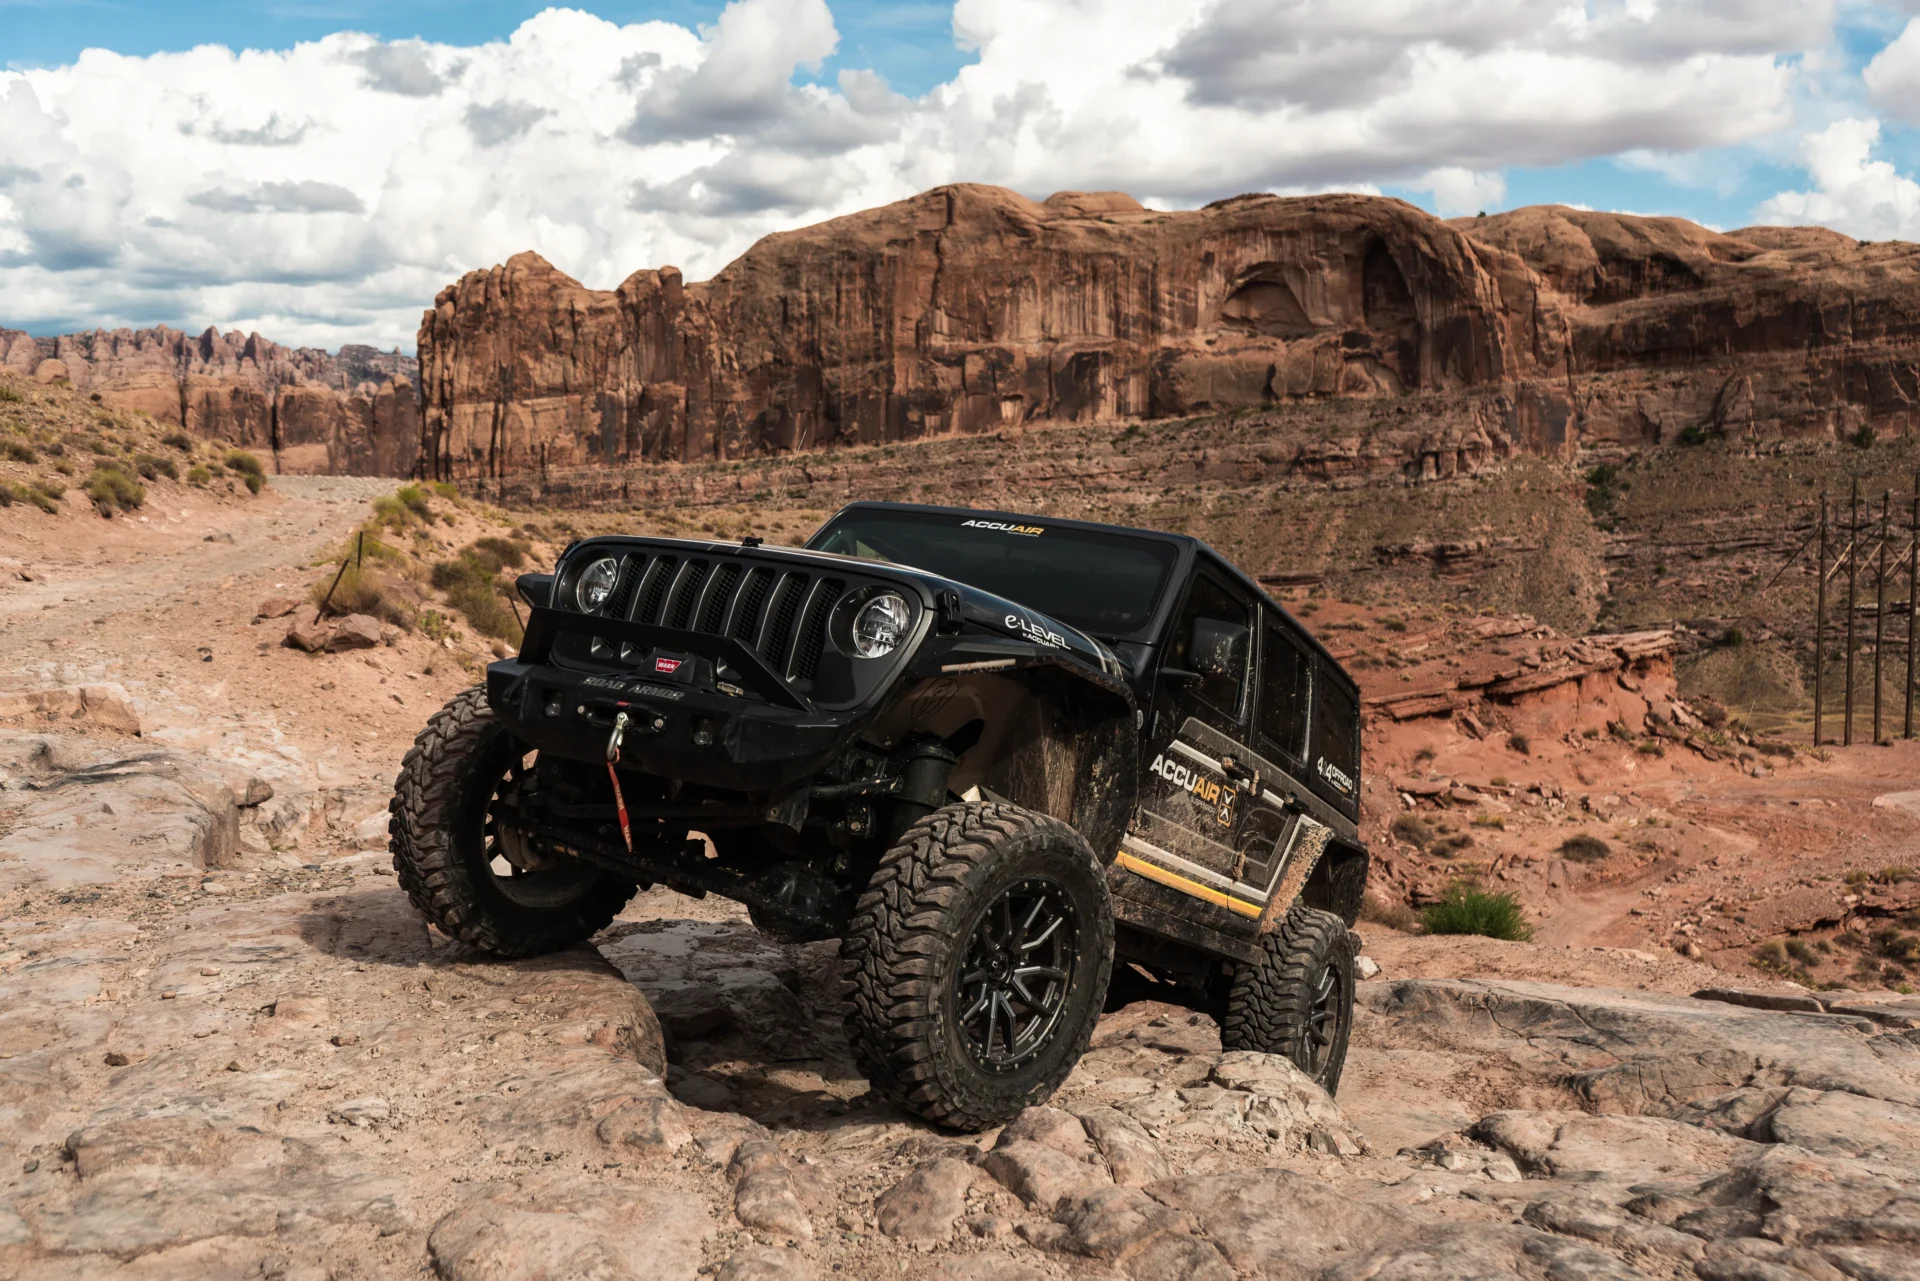 A Jeep Wrangler going off-road and rock climbing with an AccuAir air suspension upgrade.